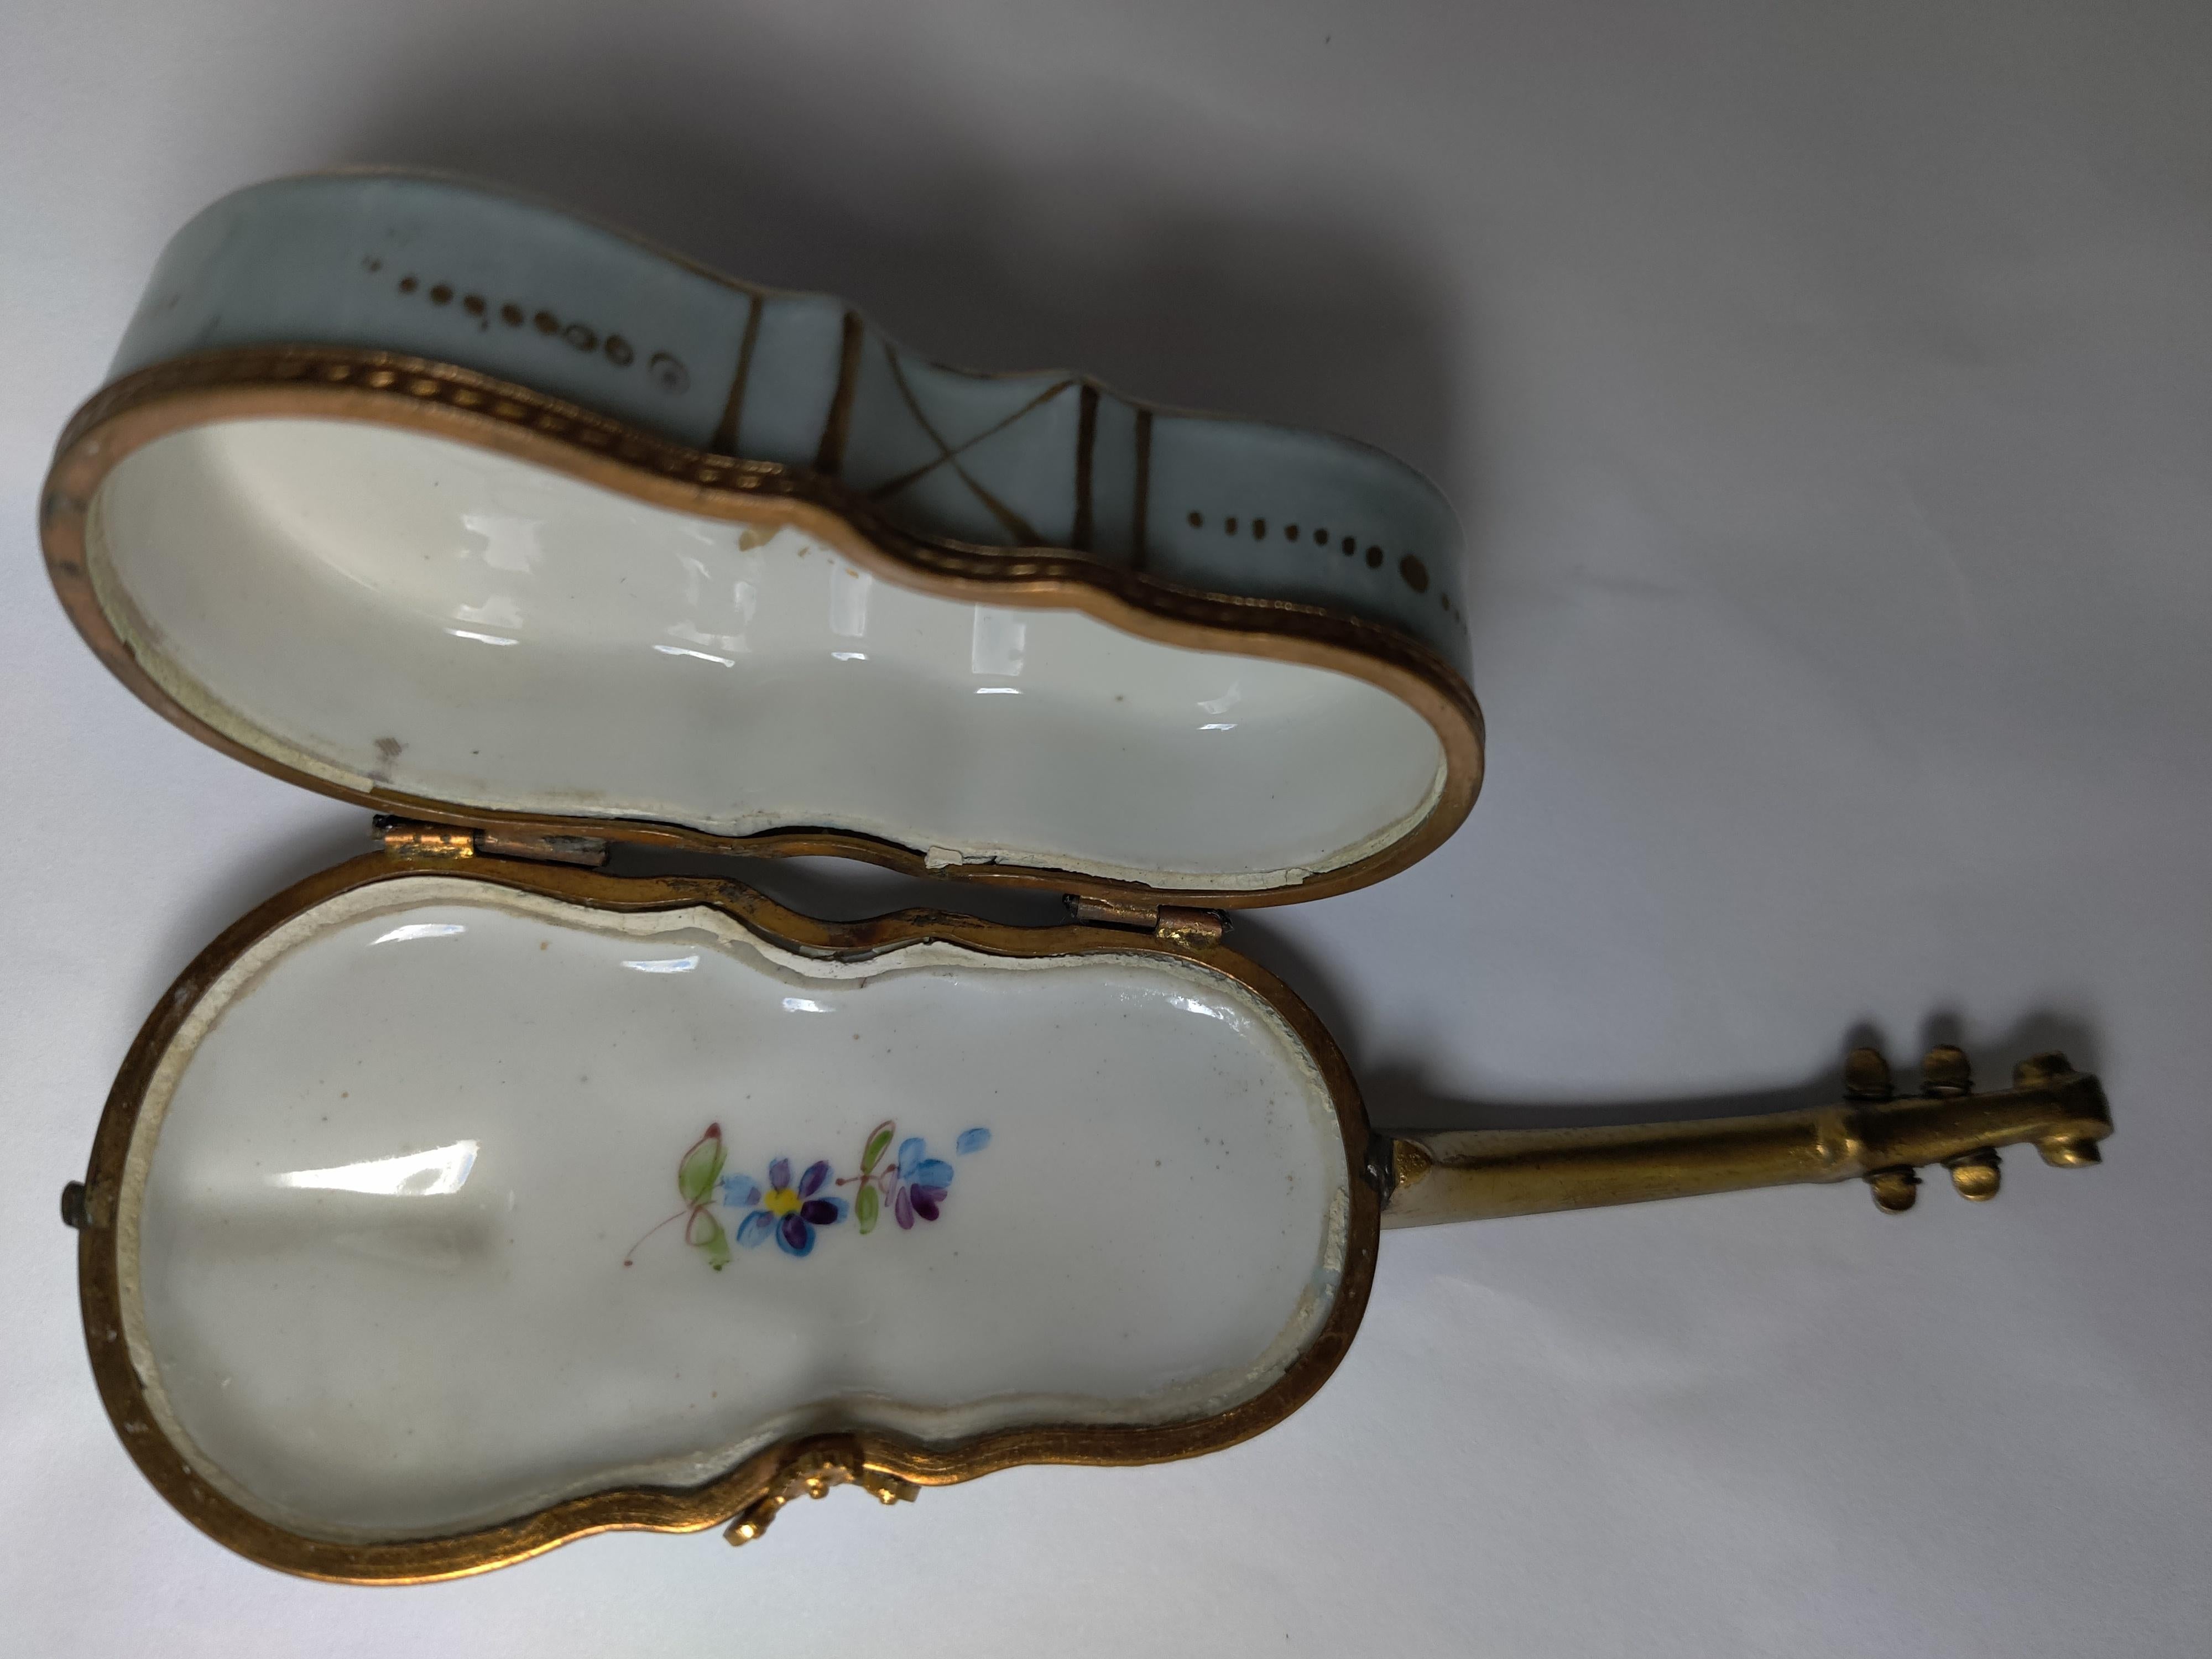 French Early 20th Century Violin Shape Pill/Trinket Box
Painted Flowers on outside - front and back
Brass trim, wire for strings.
Neck is brass.